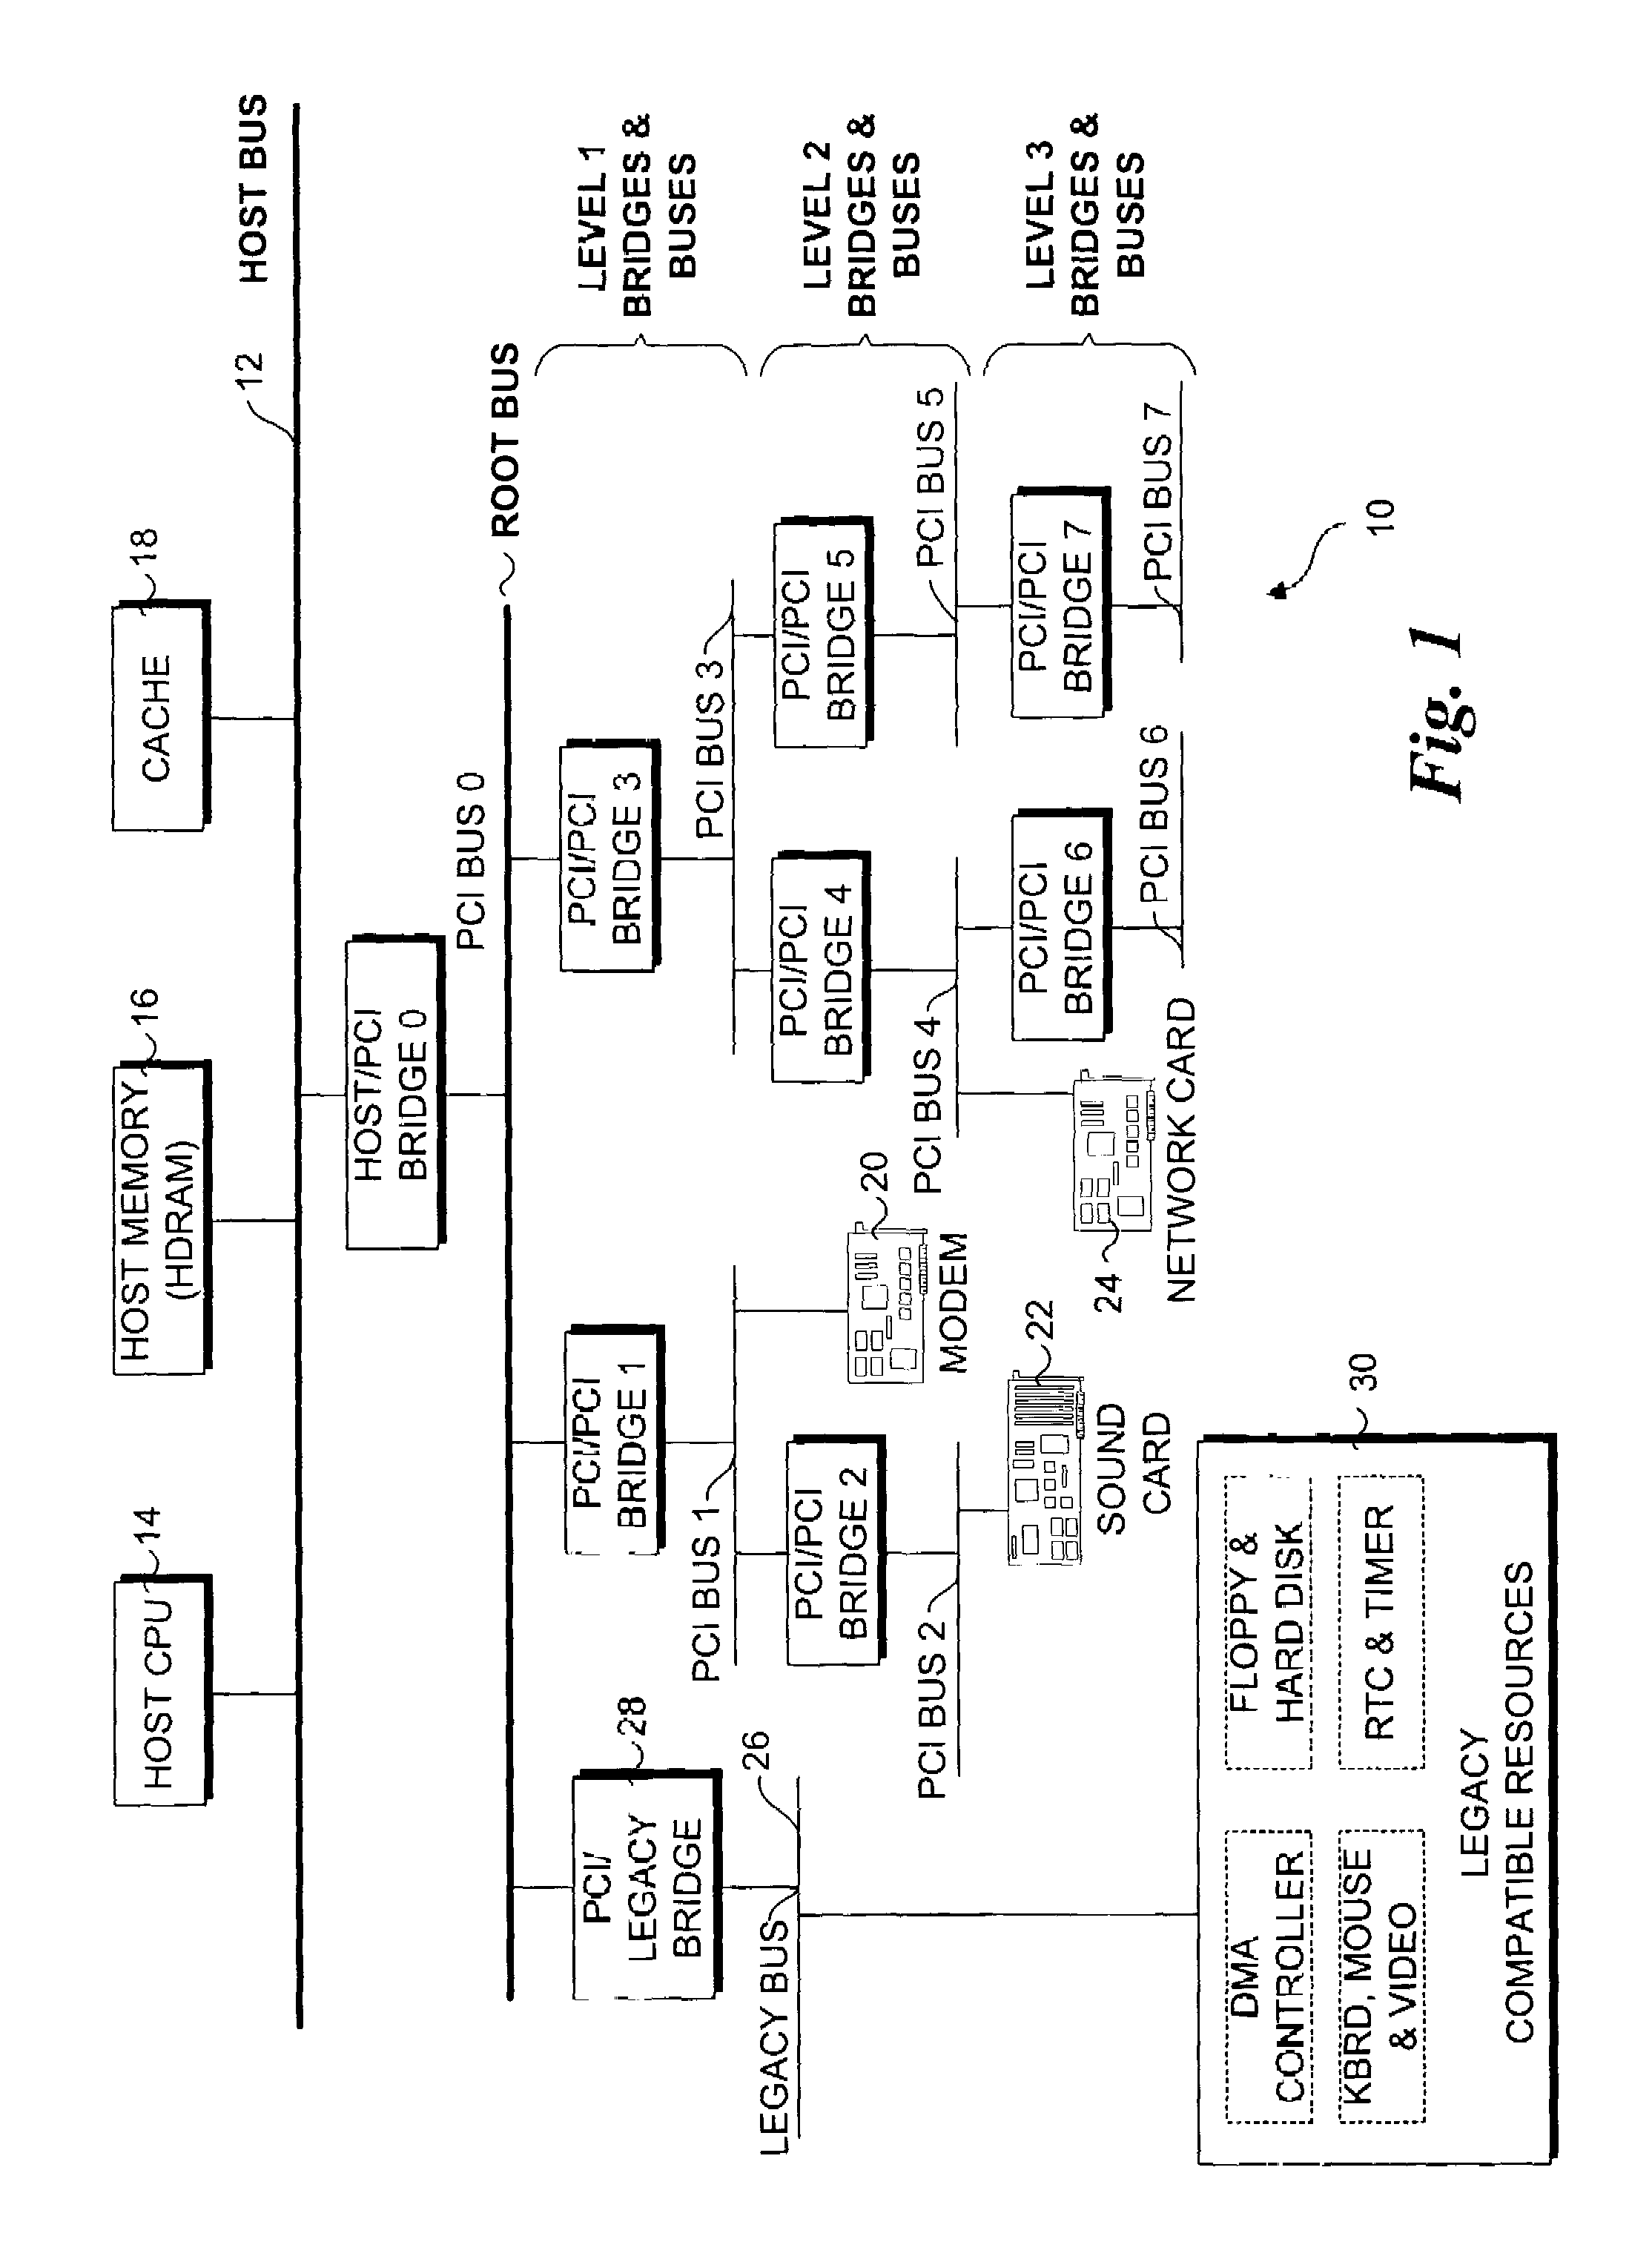 Managing peripheral device address space resources using a tunable bin-packing/knapsack algorithm